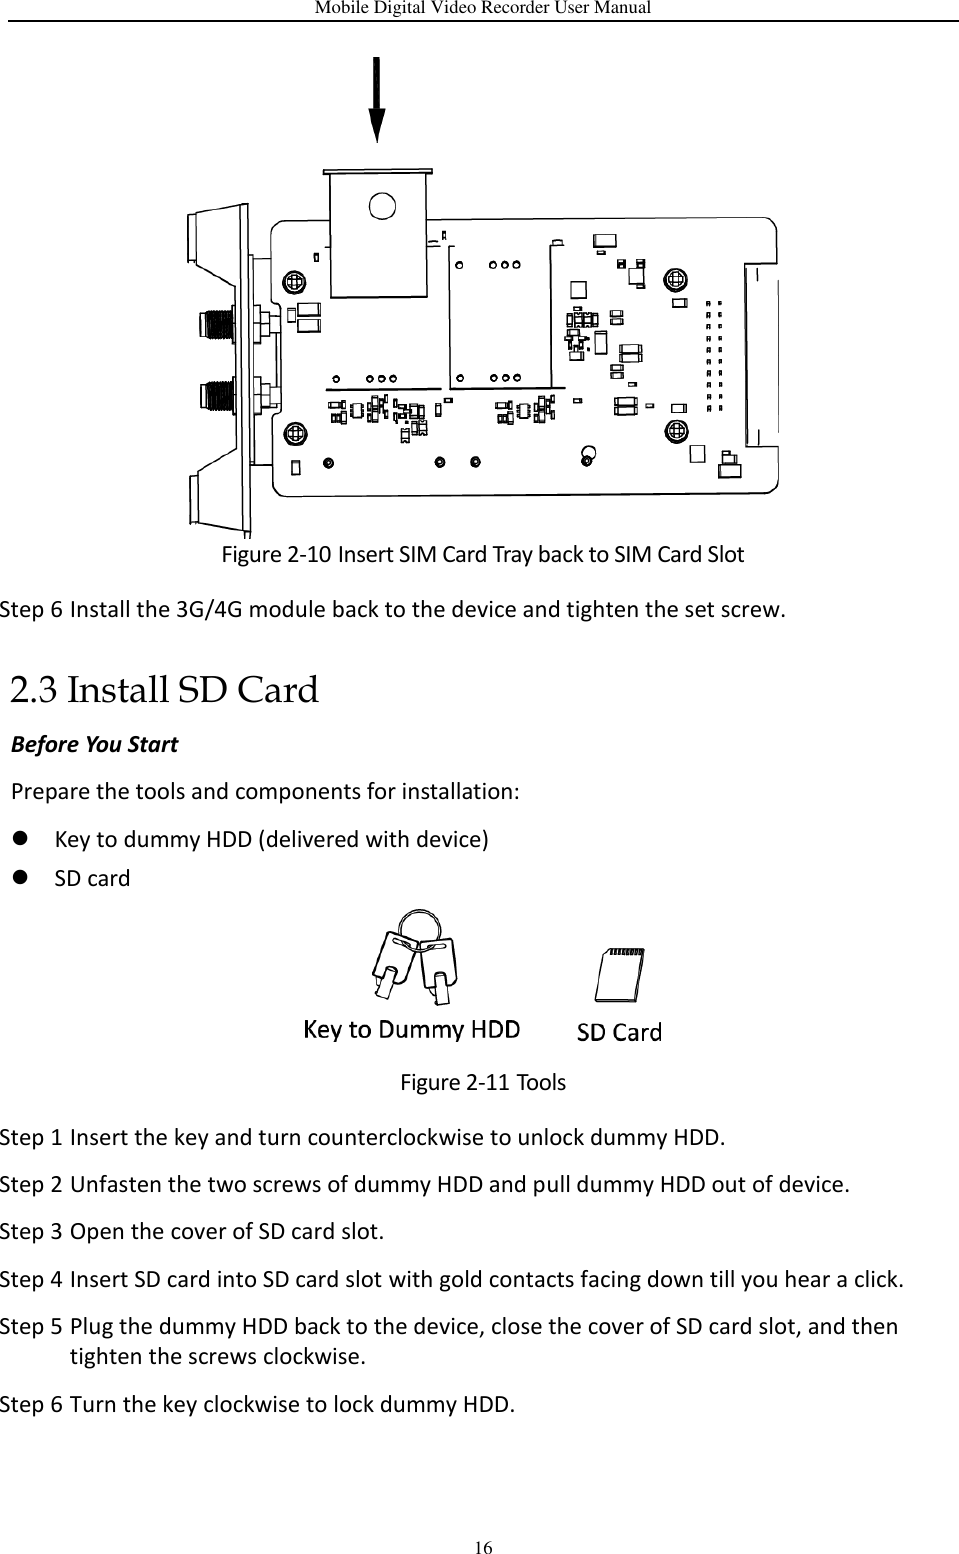 Mobile Digital Video Recorder User Manual 16  Figure 2-10 Insert SIM Card Tray back to SIM Card Slot Step 6 Install the 3G/4G module back to the device and tighten the set screw. 2.3 Install SD Card Before You Start Prepare the tools and components for installation:    Key to dummy HDD (delivered with device)  SD card  Figure 2-11 Tools Step 1 Insert the key and turn counterclockwise to unlock dummy HDD. Step 2 Unfasten the two screws of dummy HDD and pull dummy HDD out of device. Step 3 Open the cover of SD card slot. Step 4 Insert SD card into SD card slot with gold contacts facing down till you hear a click. Step 5 Plug the dummy HDD back to the device, close the cover of SD card slot, and then tighten the screws clockwise. Step 6 Turn the key clockwise to lock dummy HDD. 